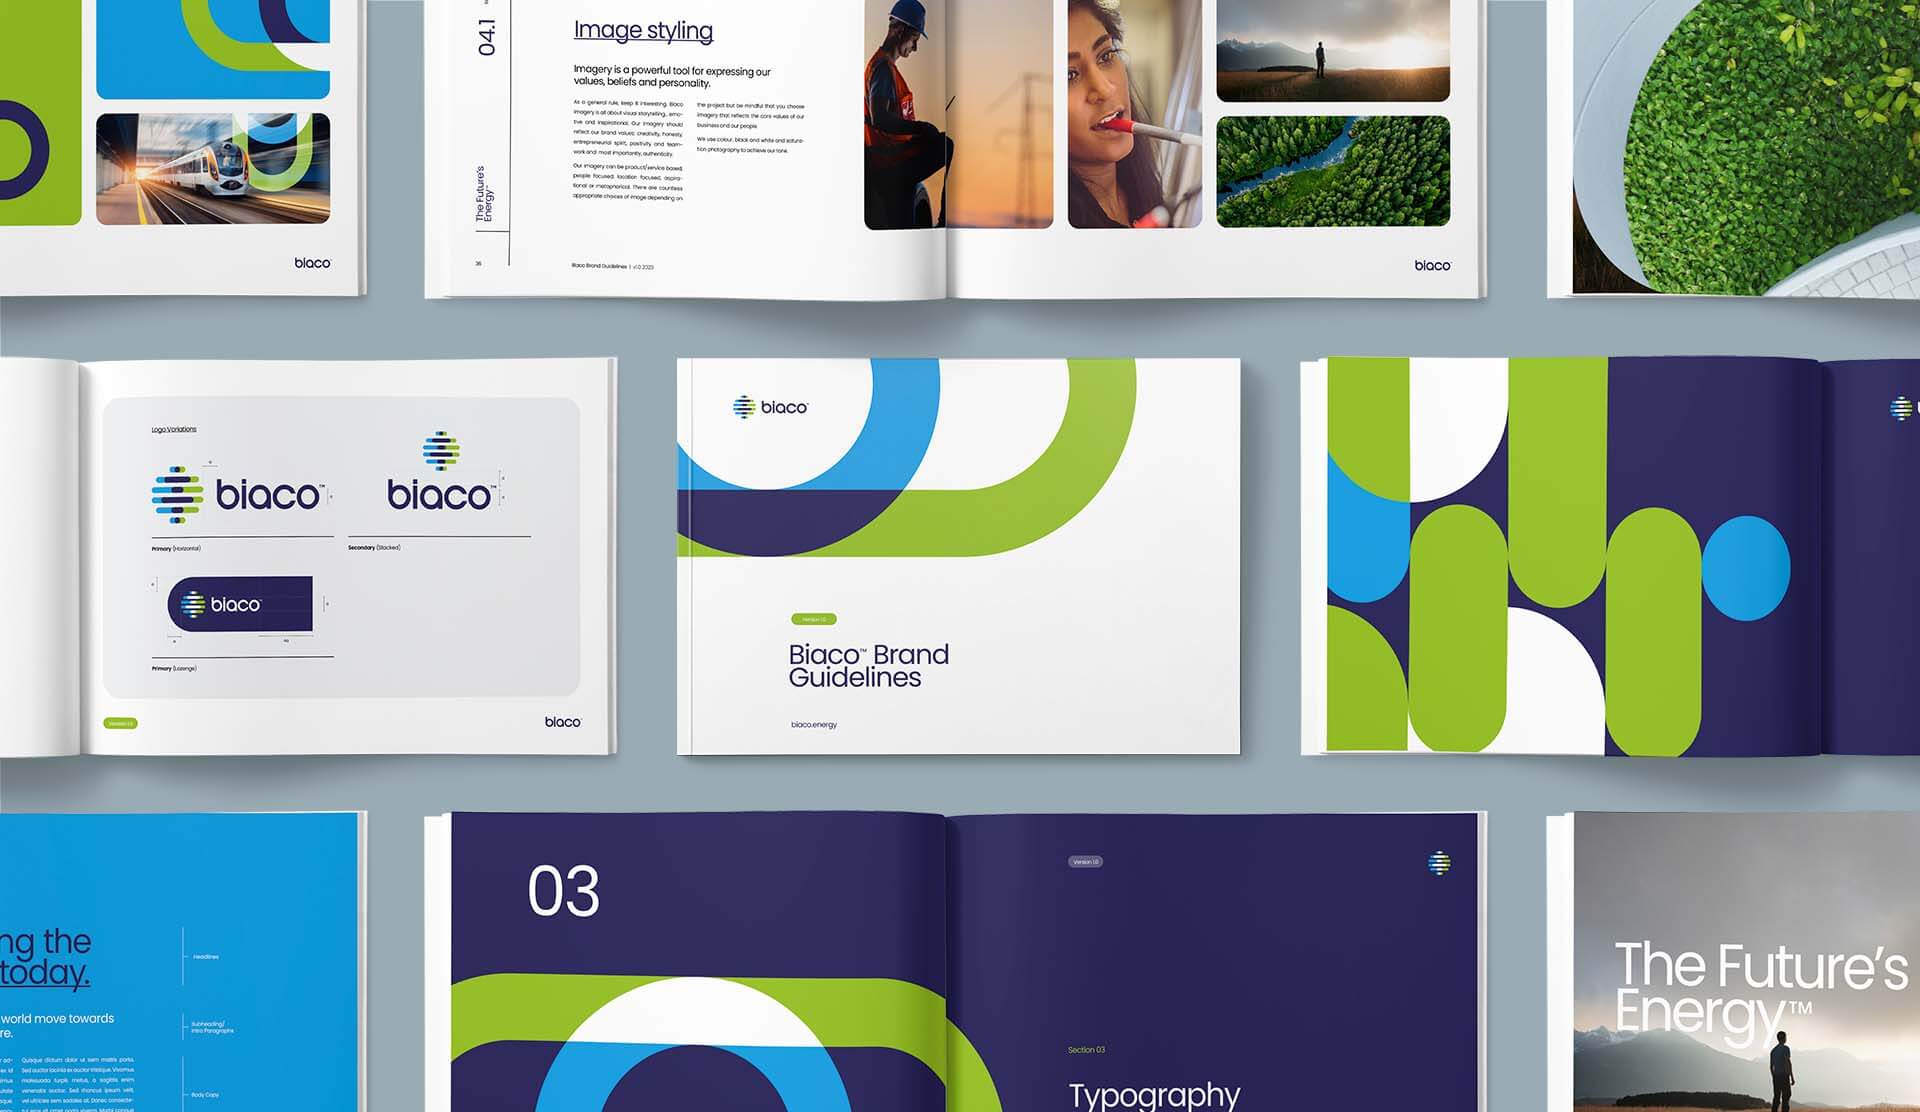 Brand guidelines for new clean energy provider BIACO